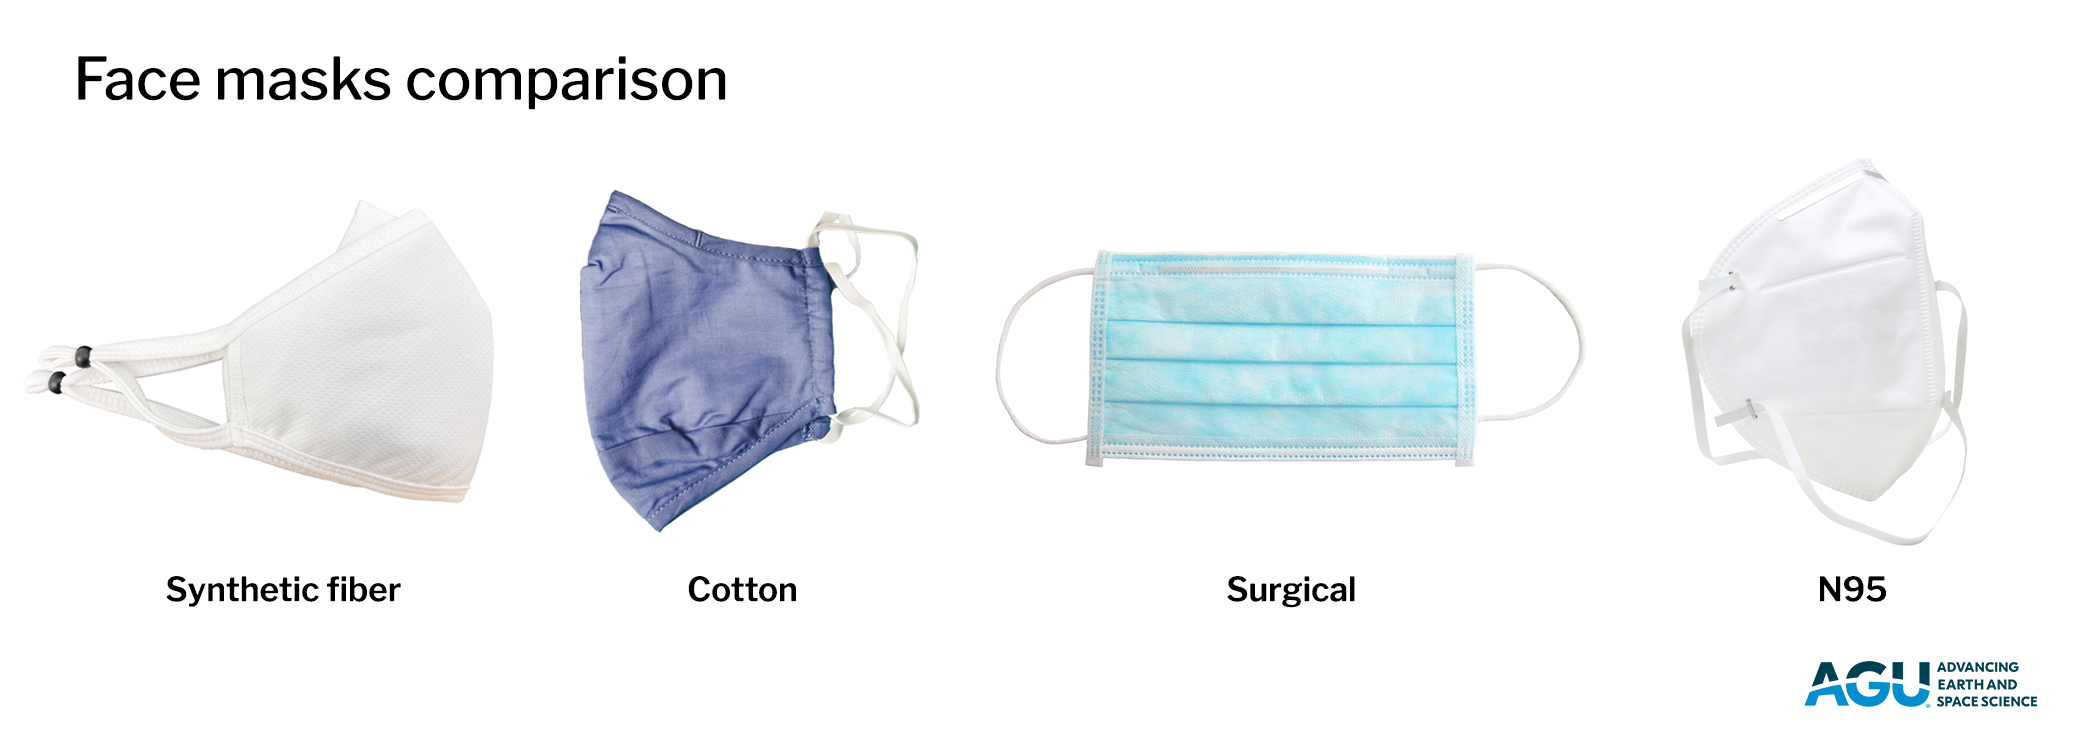 Four face masks, from left to right: white synthetic fiber, blue cotton, blue surgical, and white N95.